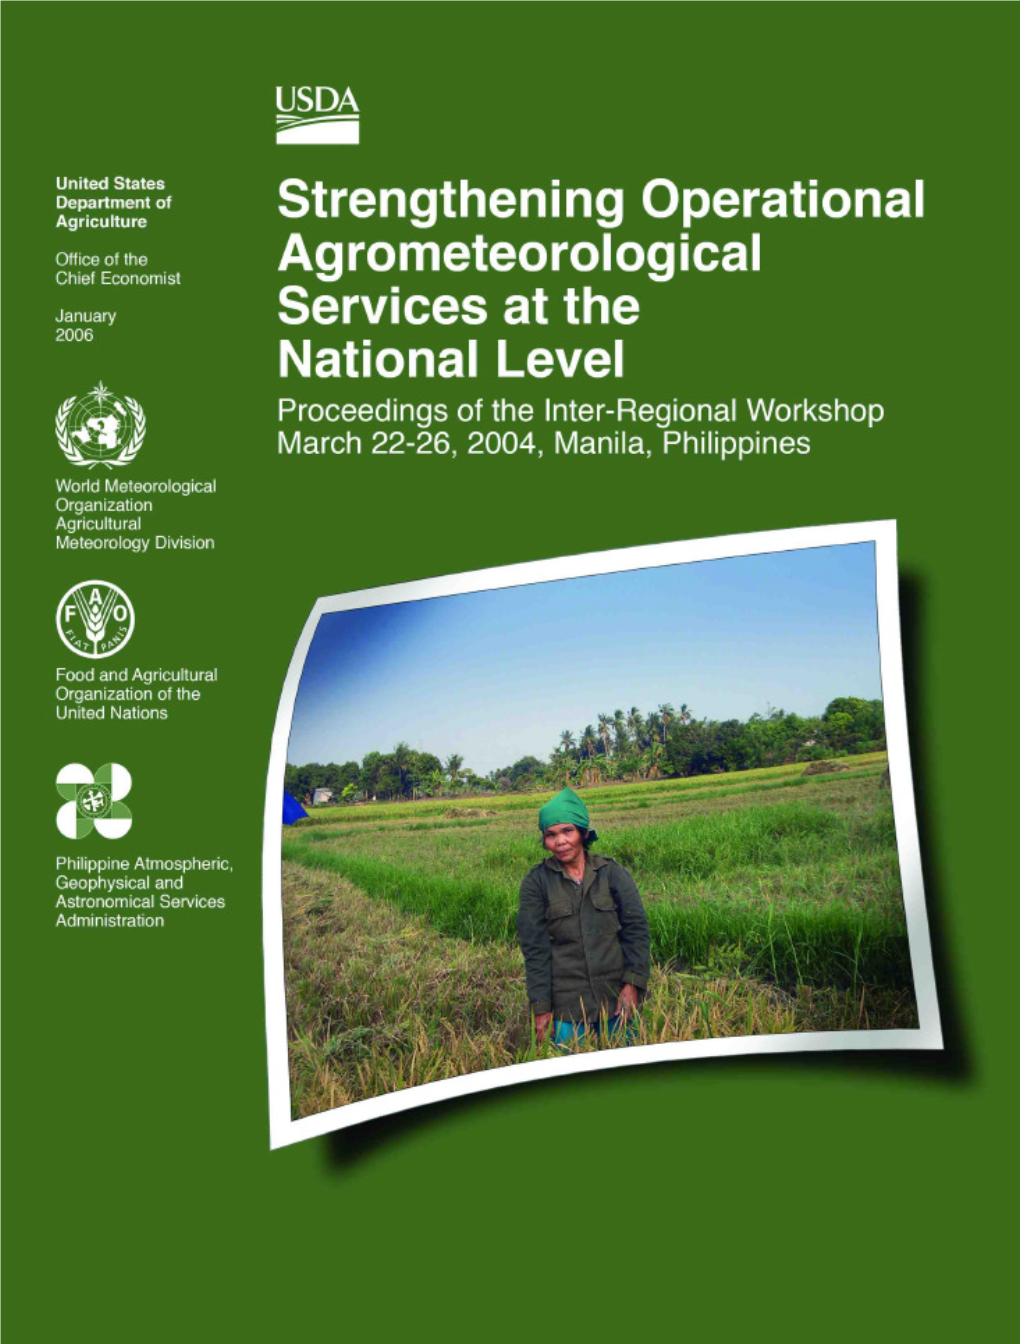 AGM, 09. Strengthening Operational Agrometeorological Services at The